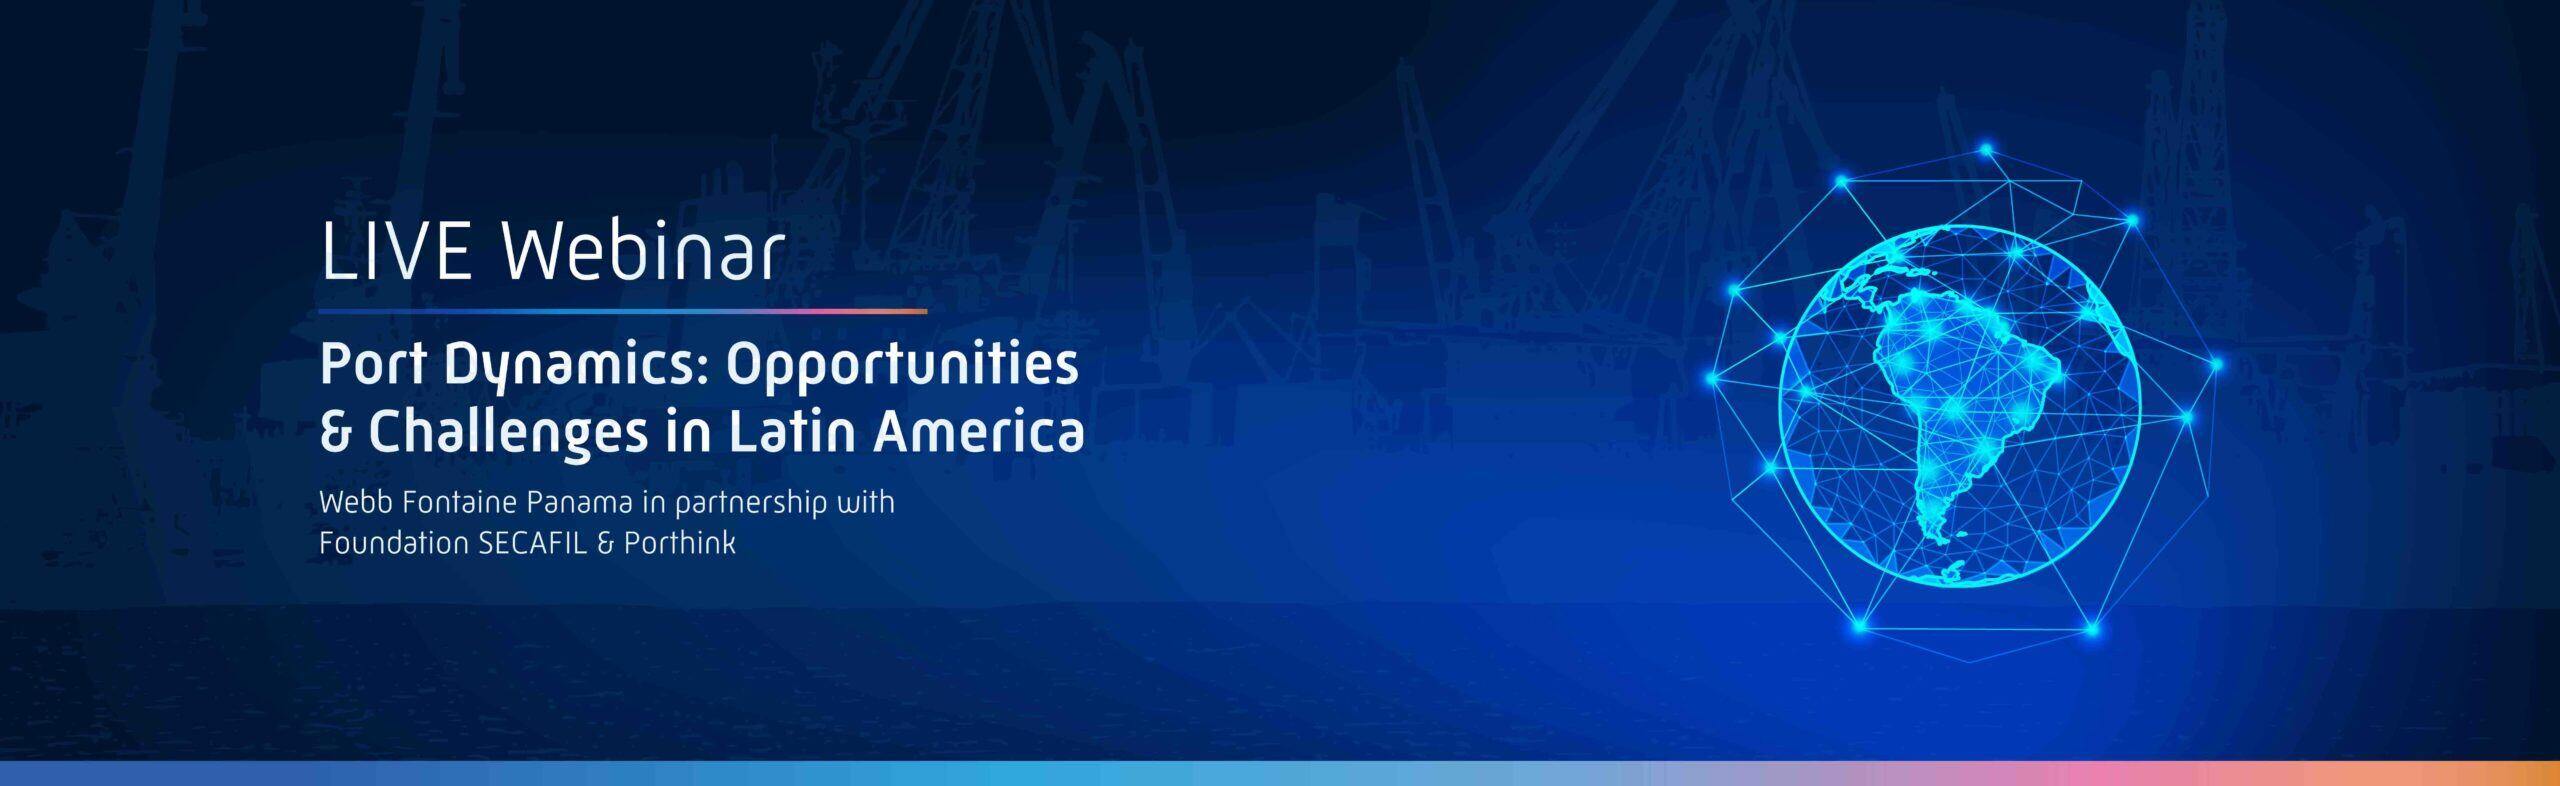 Port dynamics: Opportunities and challenges in Latin America